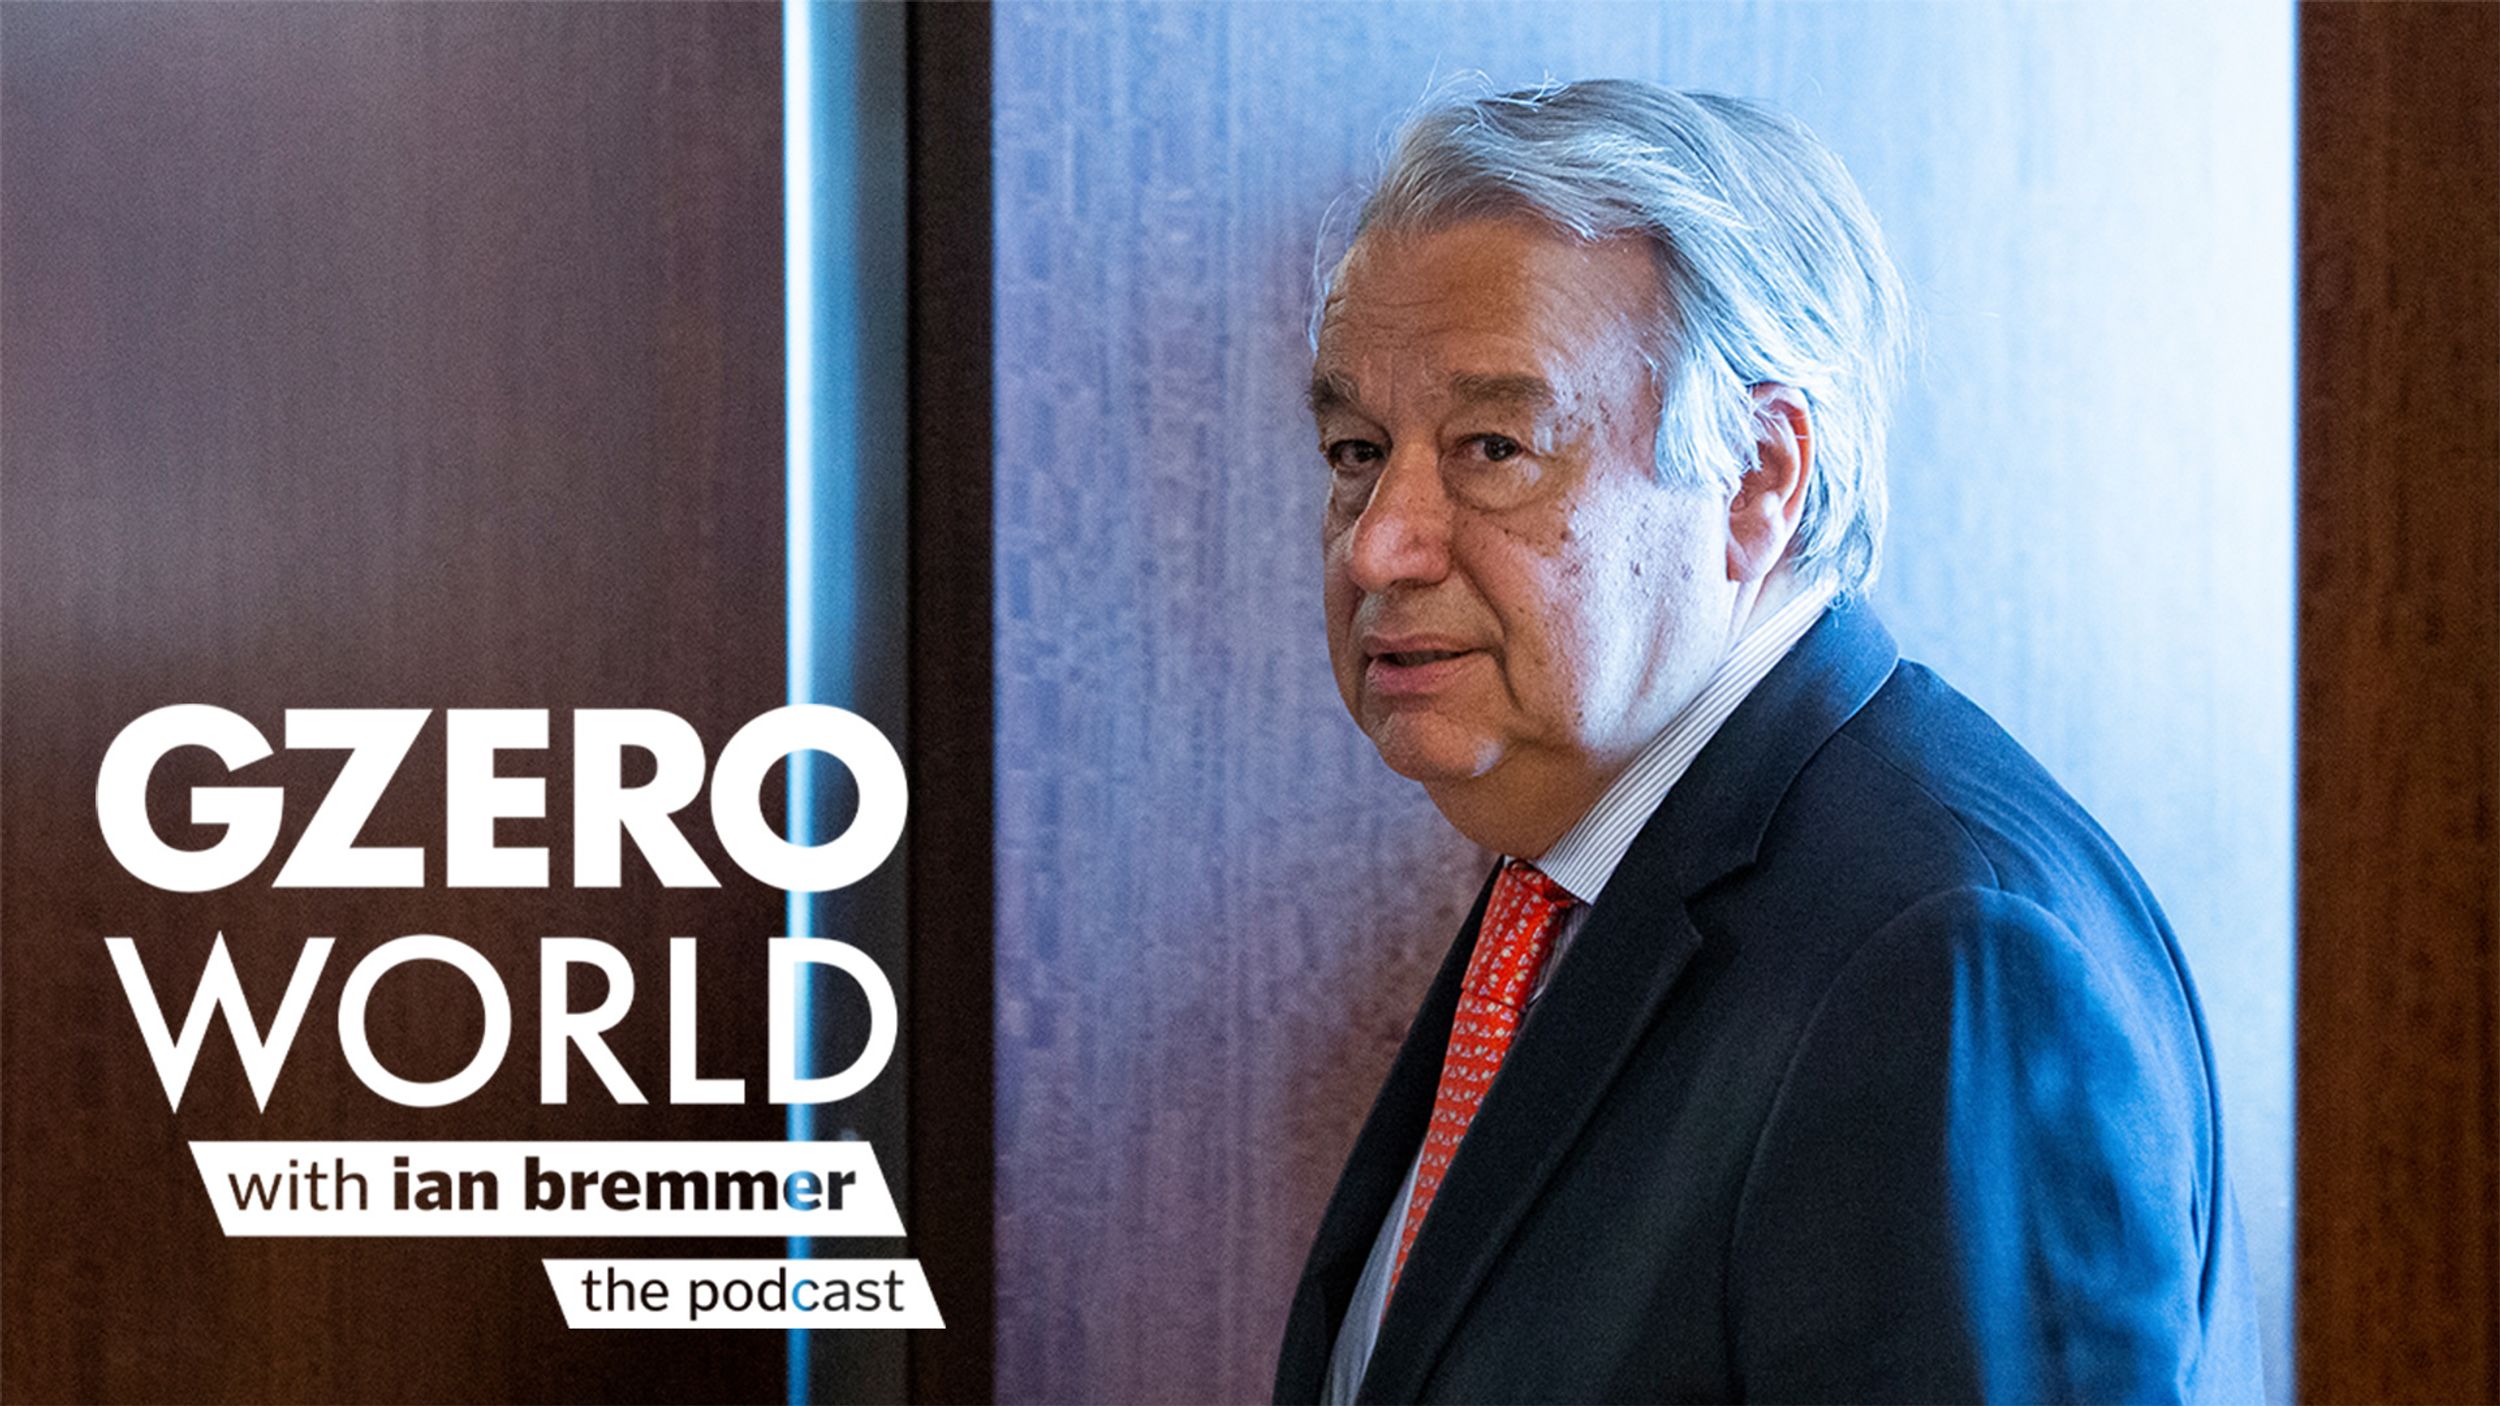 Podcast: Why We Still Need the United Nations with UN Secretary-General António Guterres